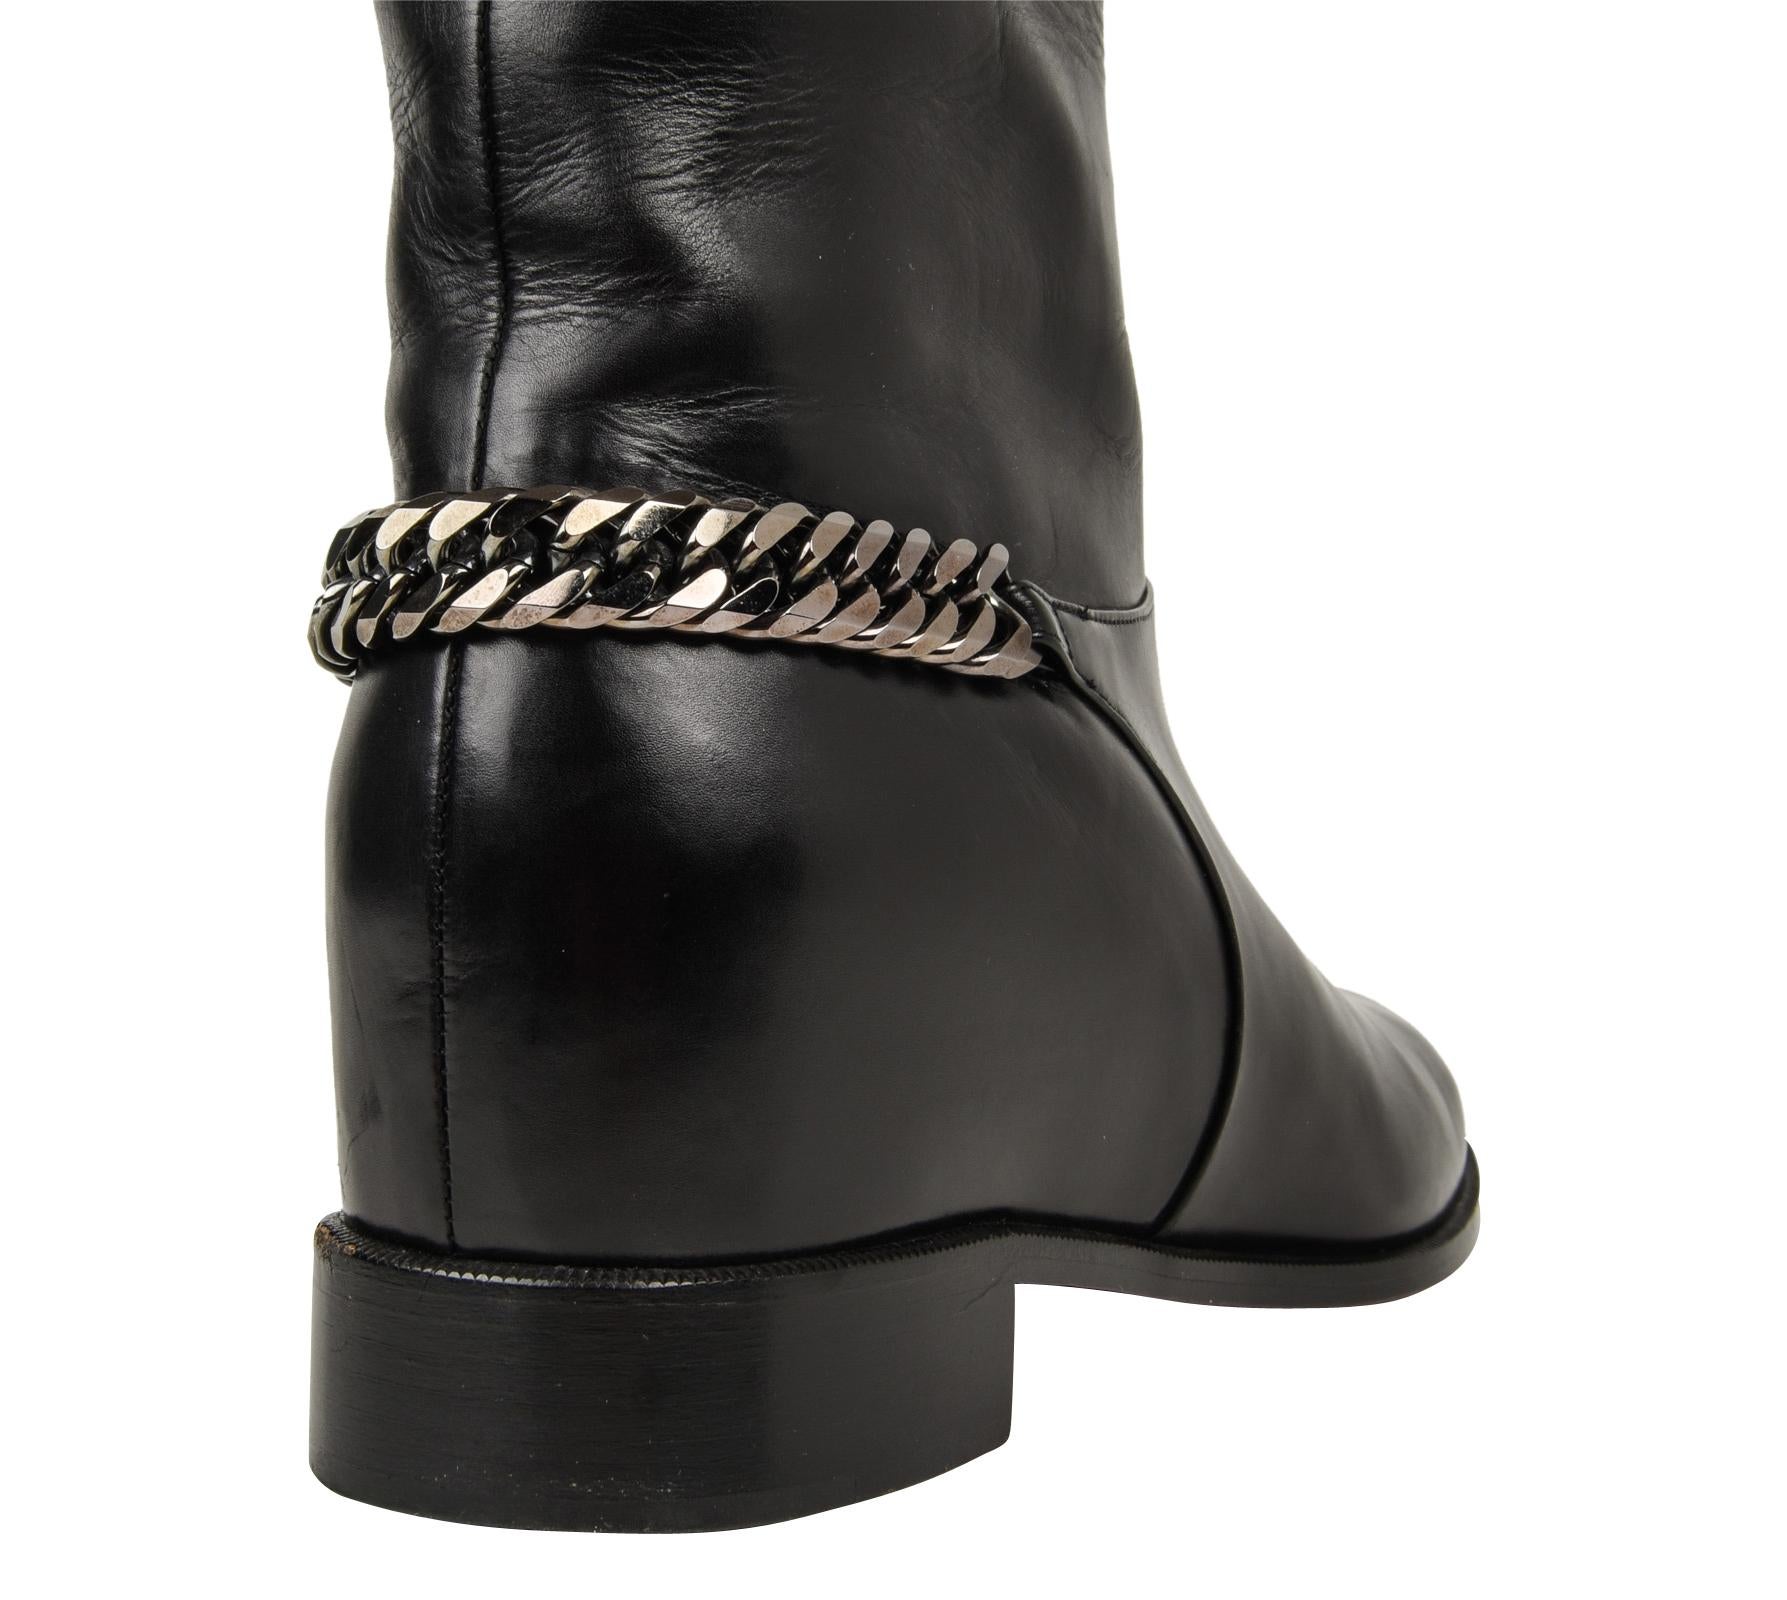 Guaranteed authentic Christian Louboutin flat black leather knee high cate boots.
Boot has hematite colored chain around heel.
Riding inspired.
final sale

BOOT SIZE:  39
USA SIZE  9

BOOT MEASURES: 
HEEL  1